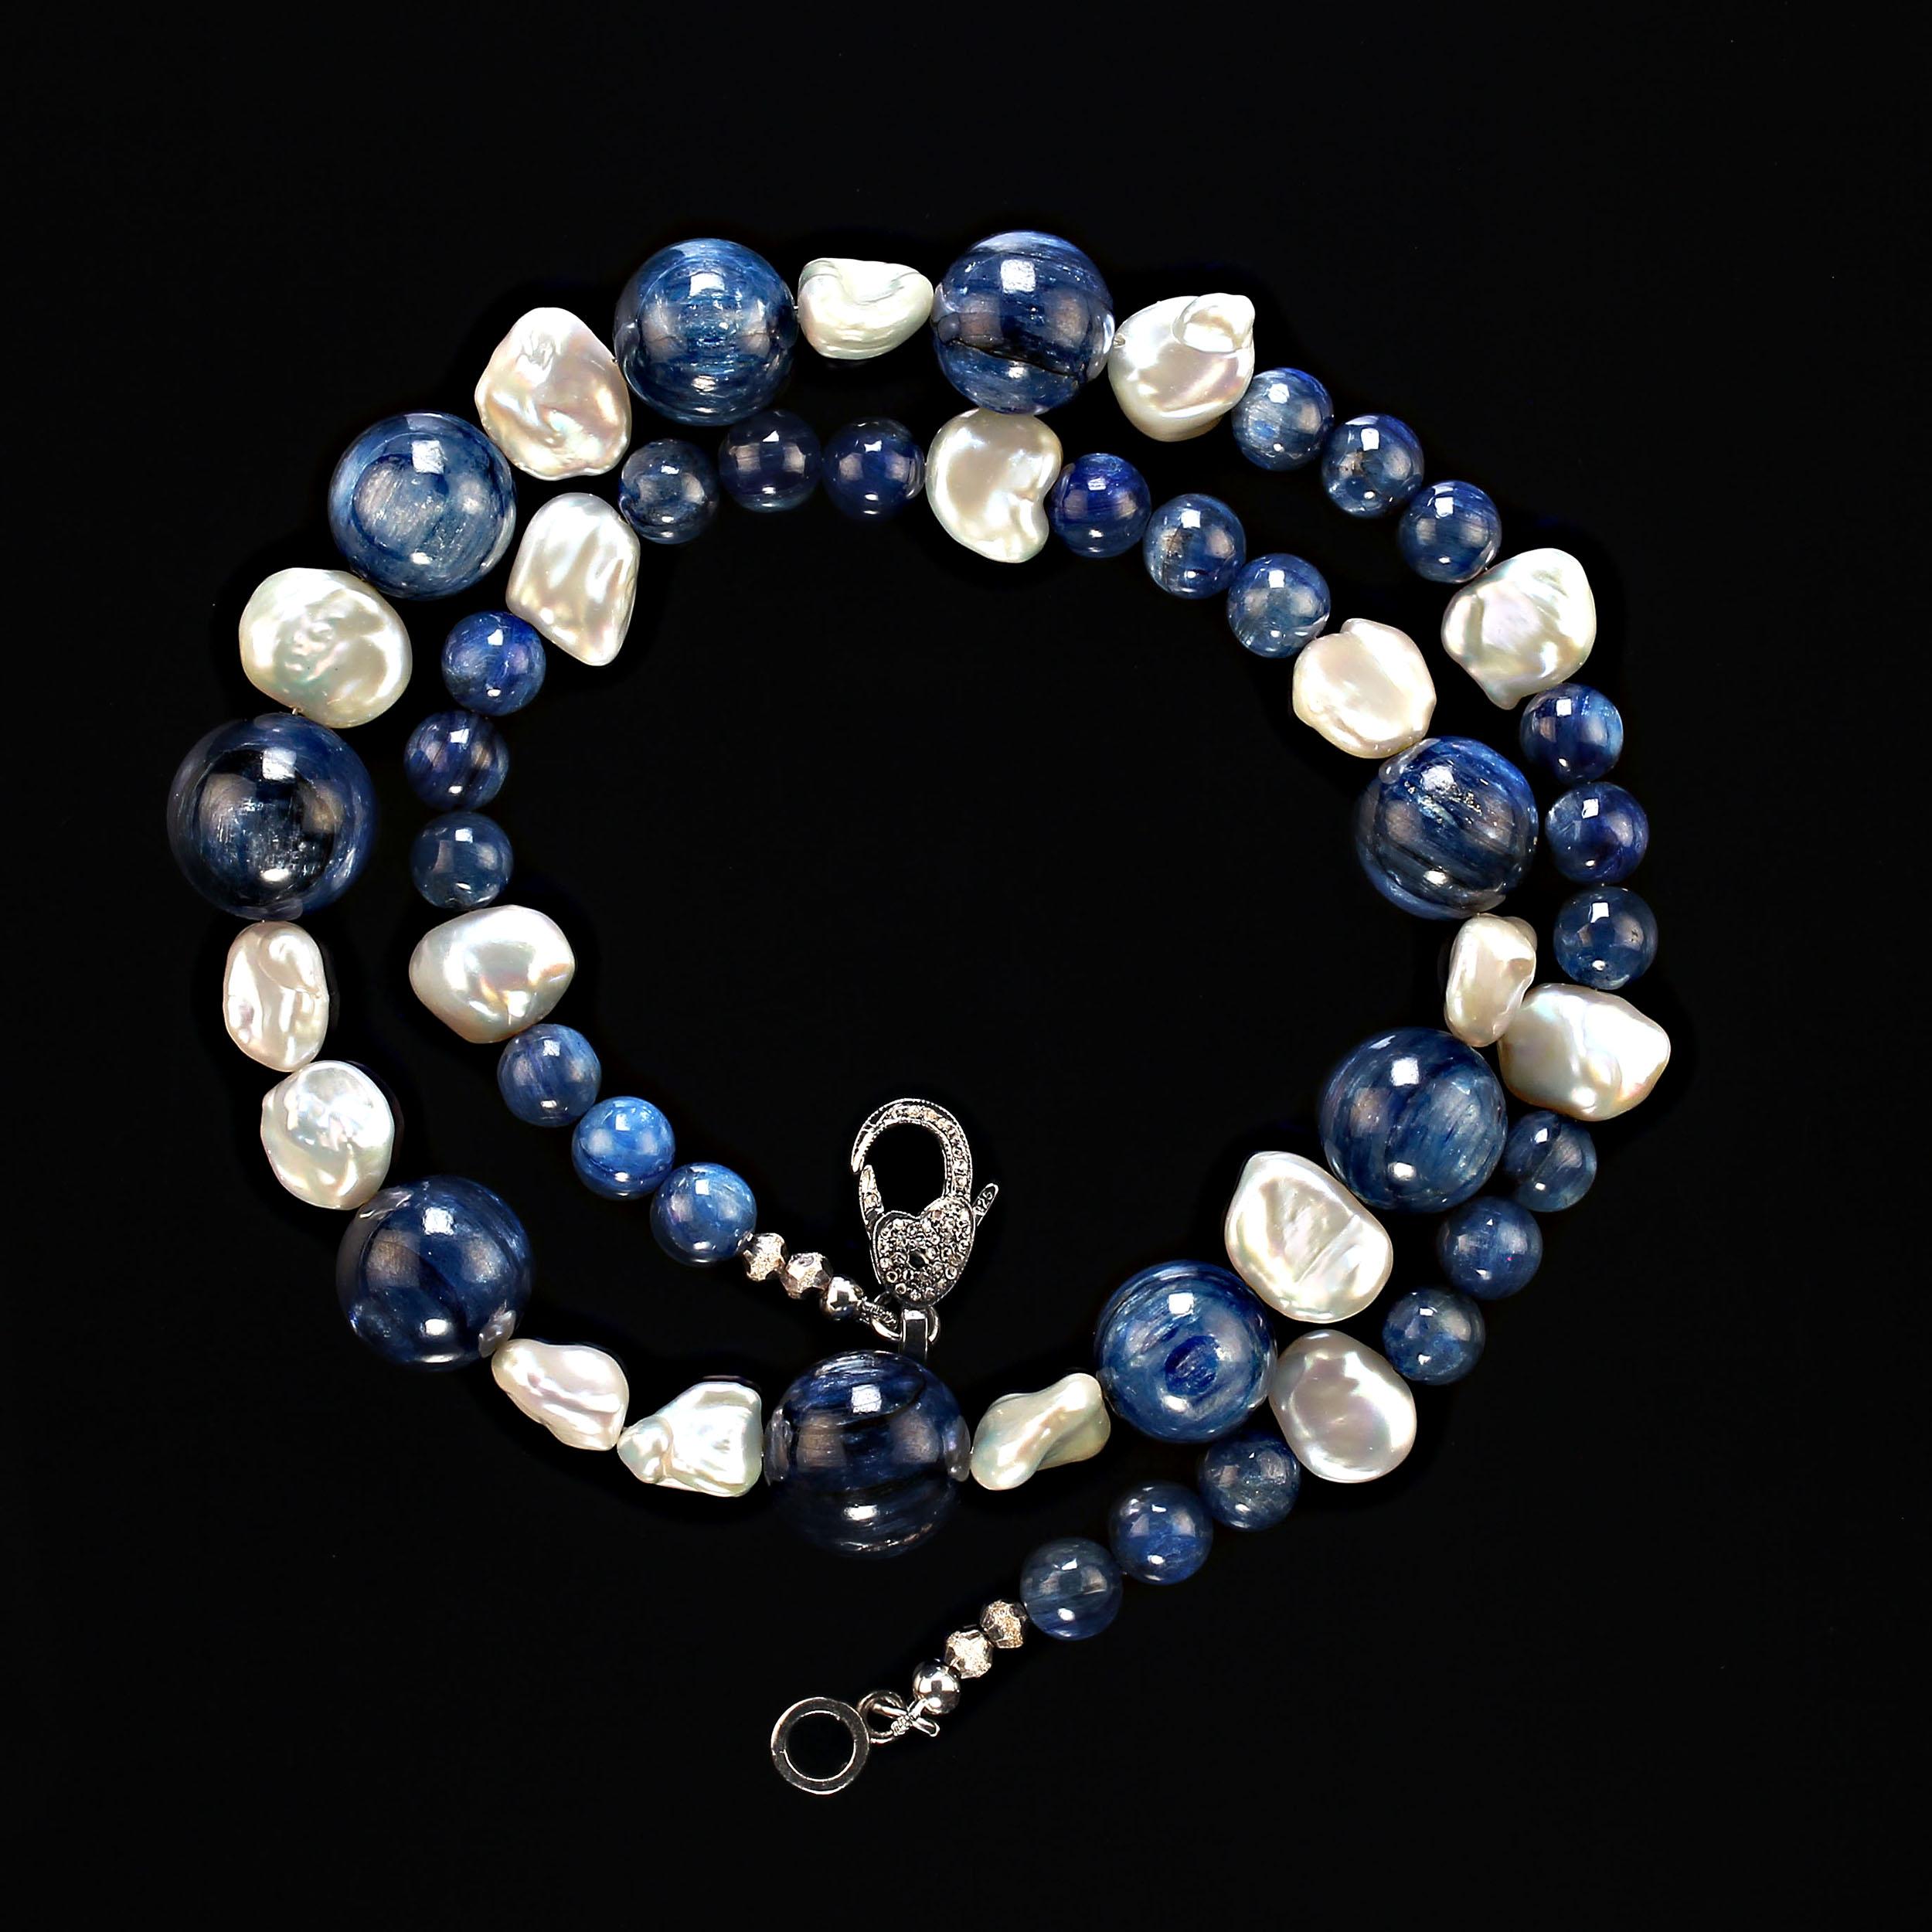 23 Inch Elegant one-of-a-kind necklace featuring two sizes of glowing round kyanite and iridescent white keshi pearls. This gorgeous kyanite has beautiful striations and variations in the best blue of kyanite. They are 16, 14, and 8 MM in size. The